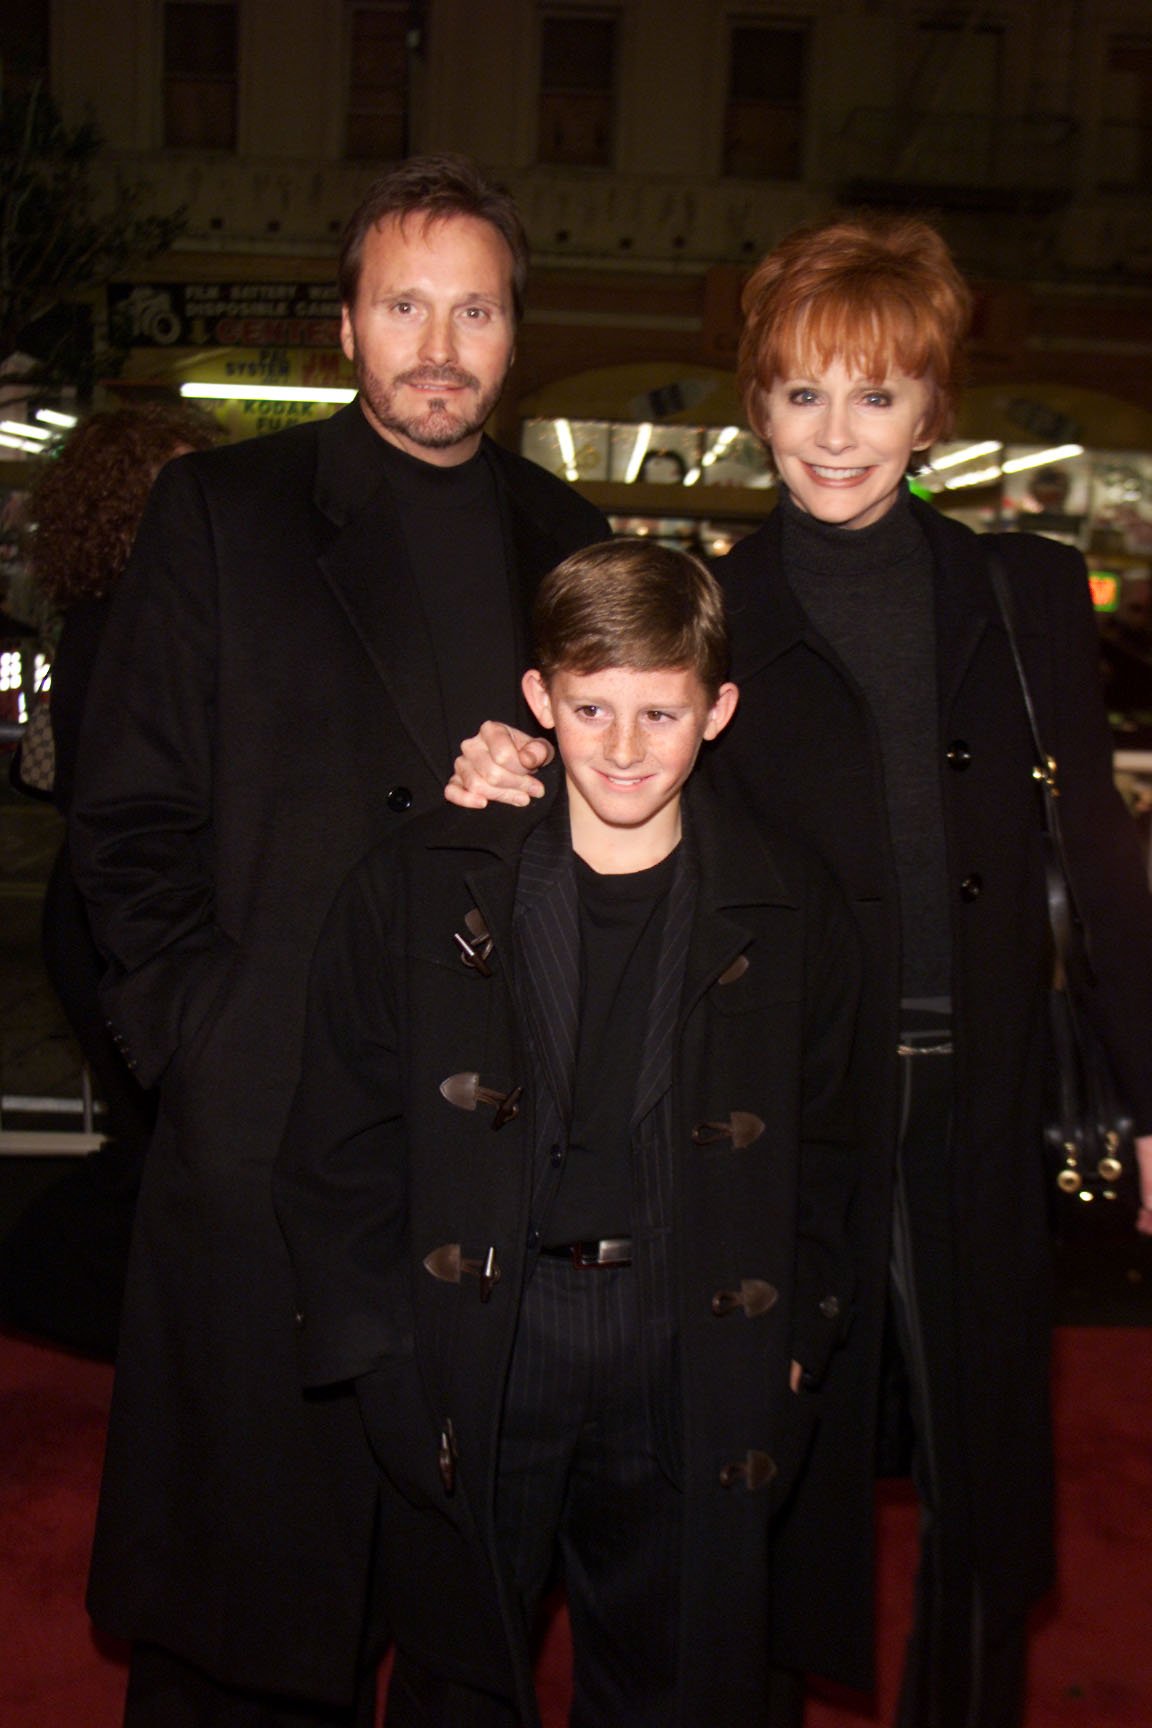 Reba McEntire and husband Narvel Blackstock and their son Shelby at the premiere of "A Walk To Remember" at the Chinese Theater in Los Angeles, Ca. Wednesday, Jan. 23, 2002. | Source: Getty Images